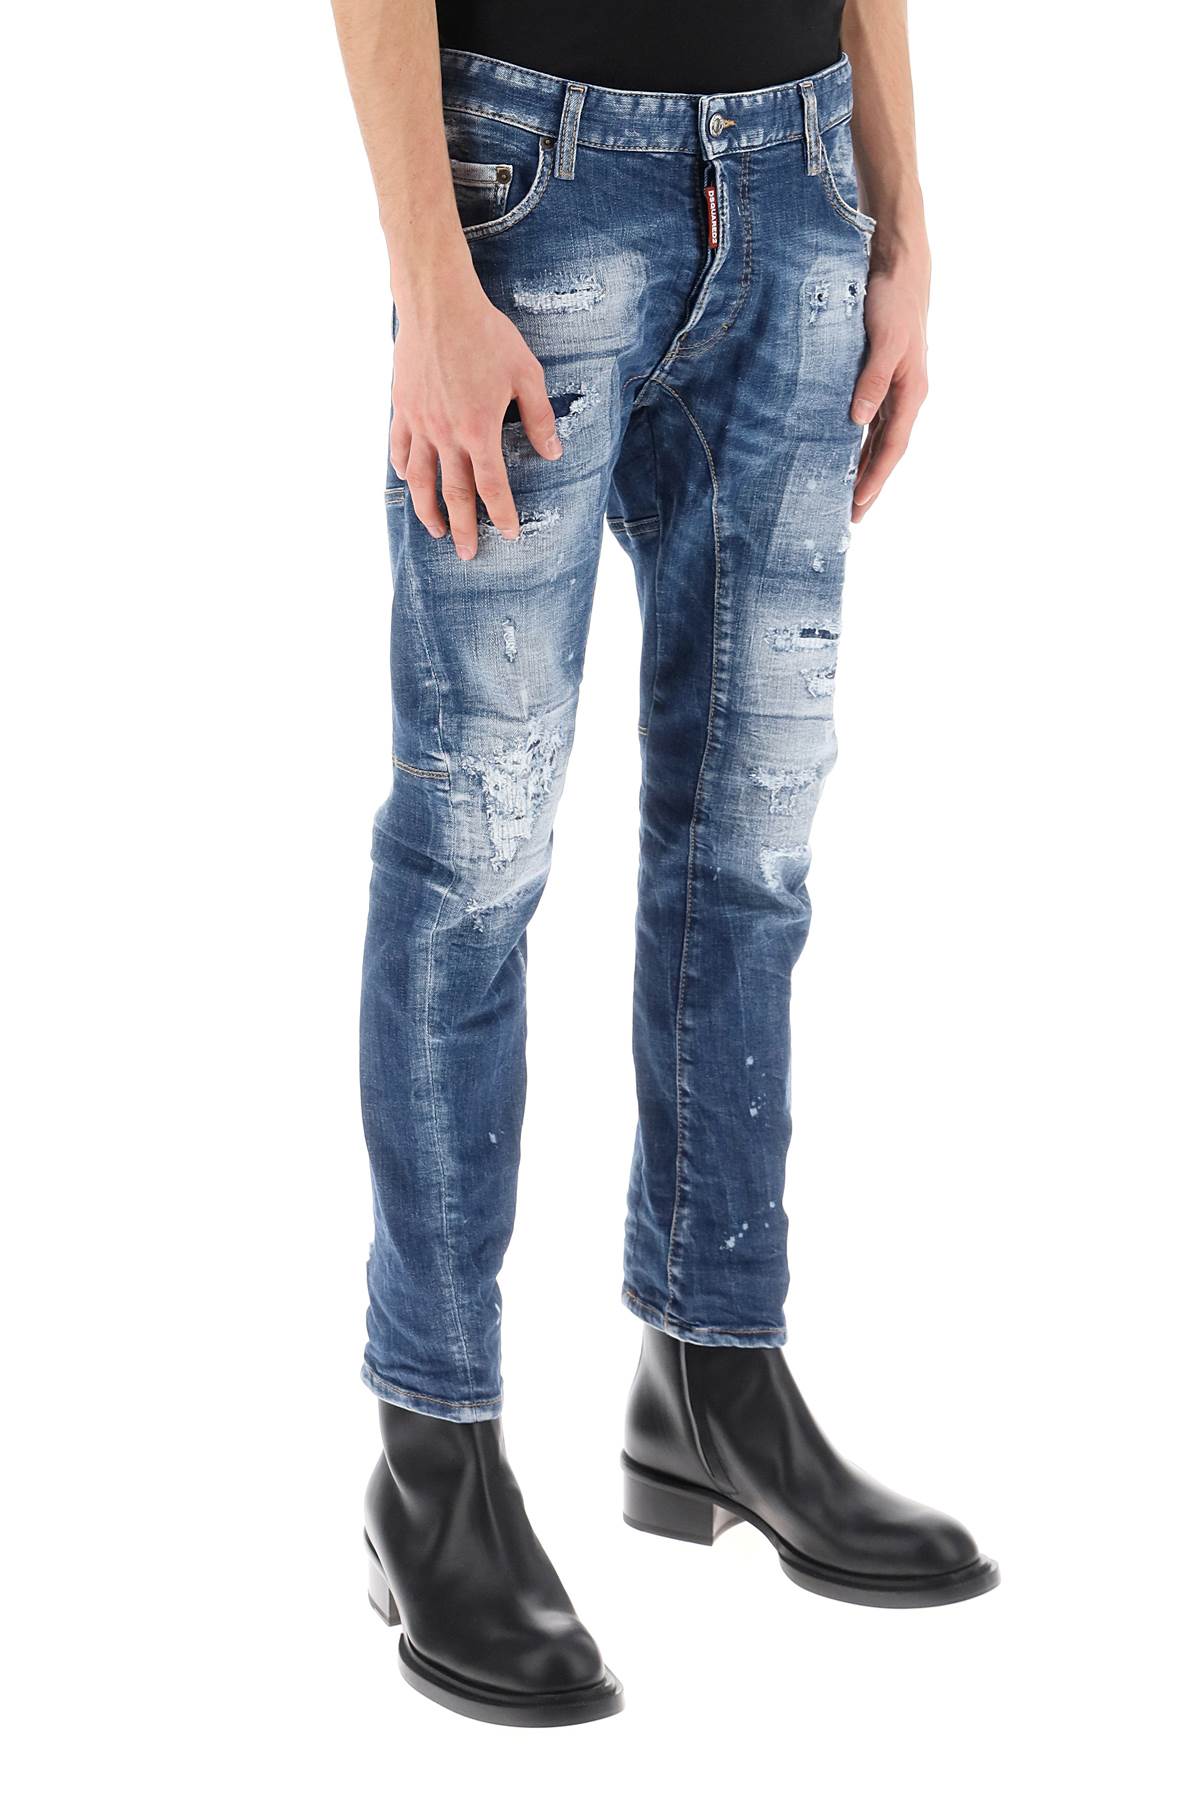 Dsquared2 medium mended rips wash tidy biker jeans-1